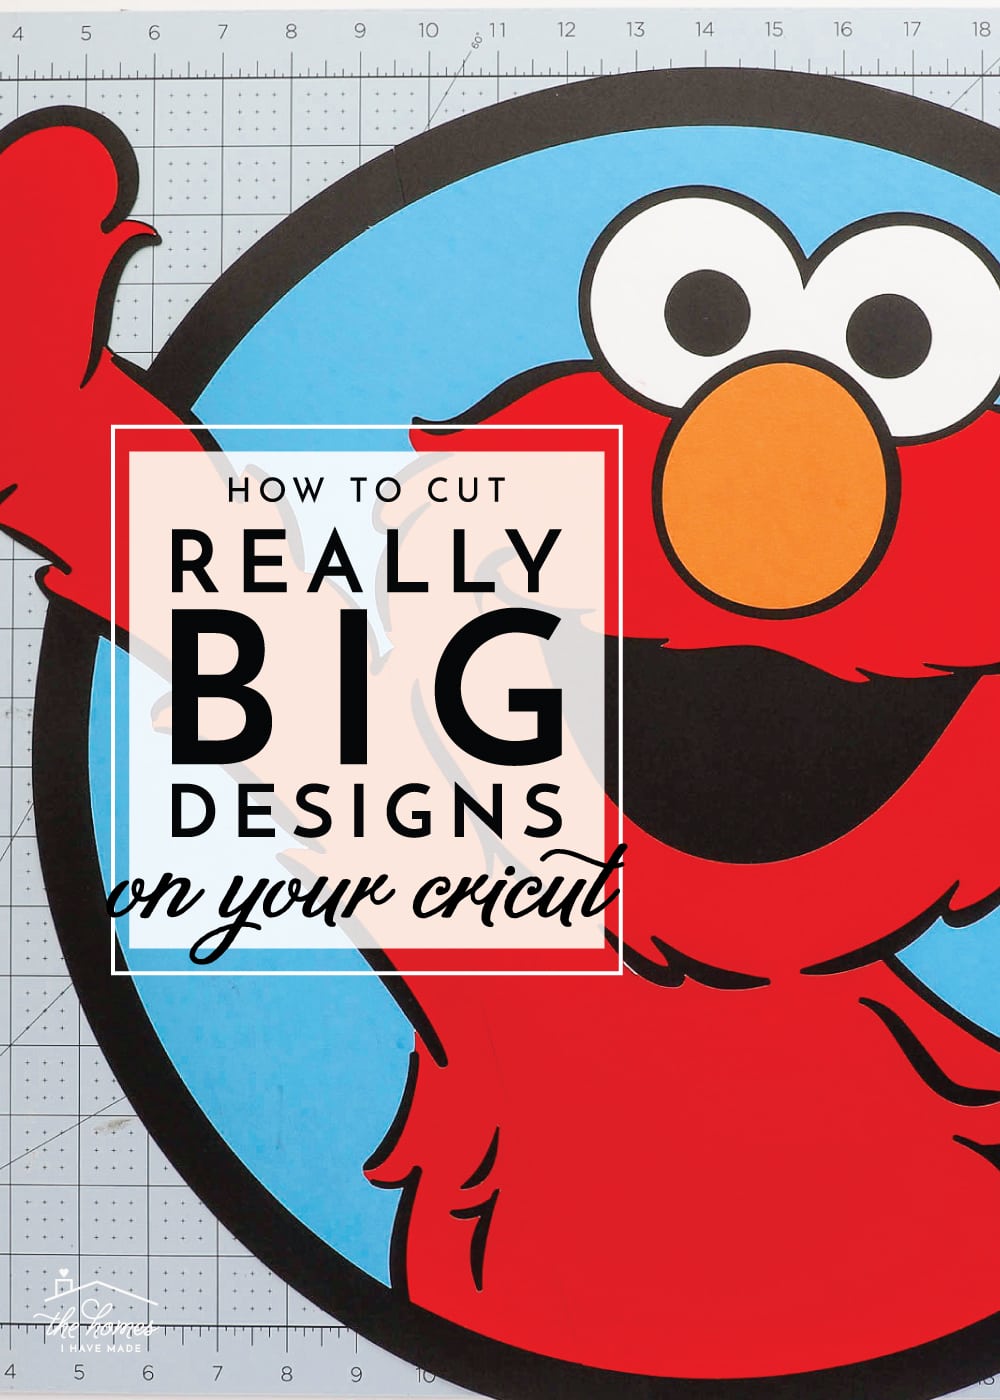 Elmo character over a Cricut cutting mat with text overlay